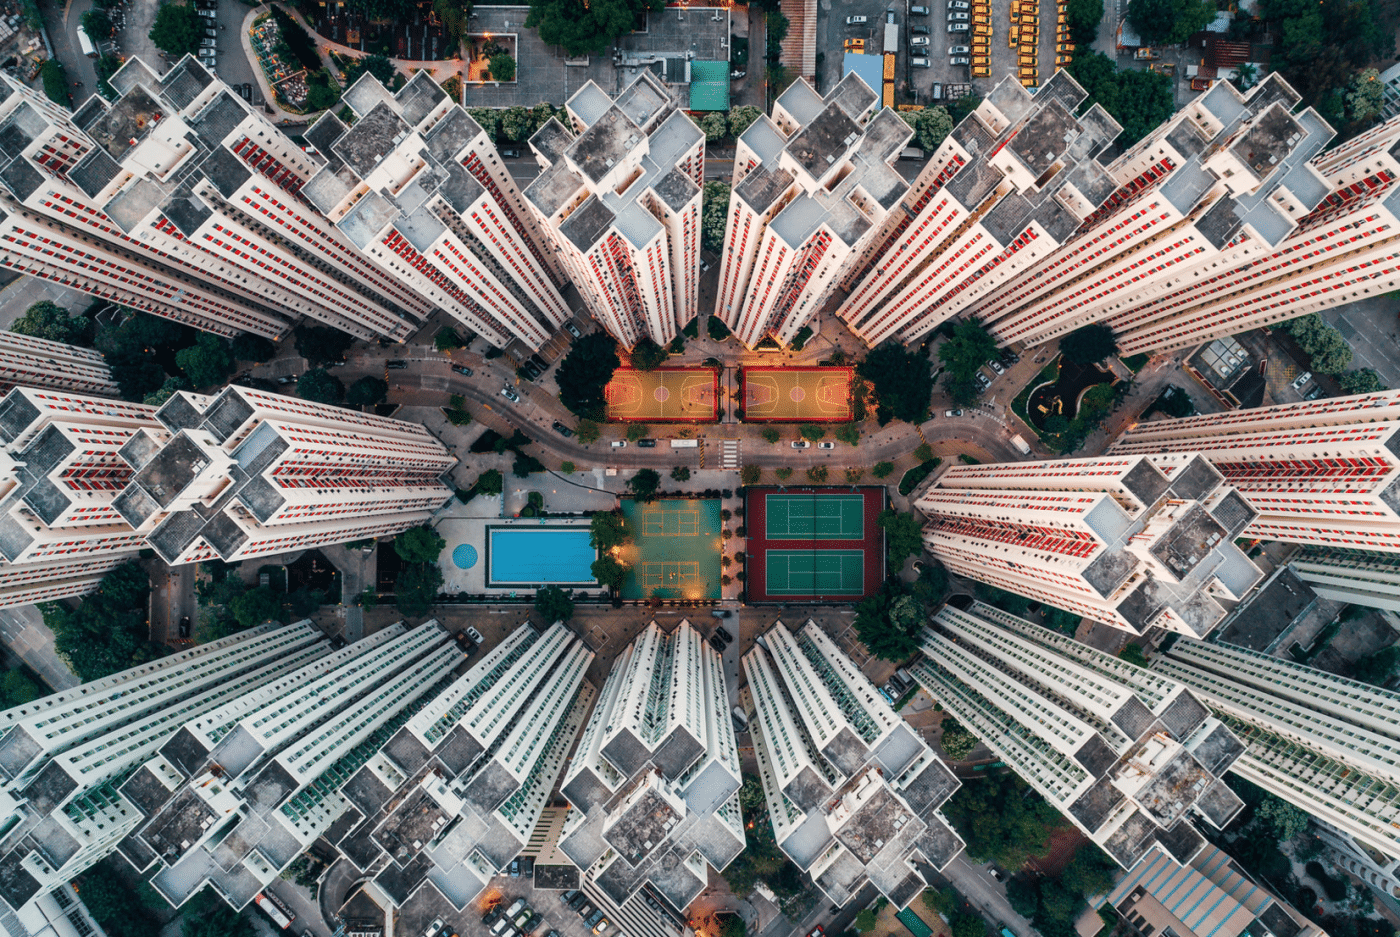 Photographers Who Produce Stunning Aerial Photography